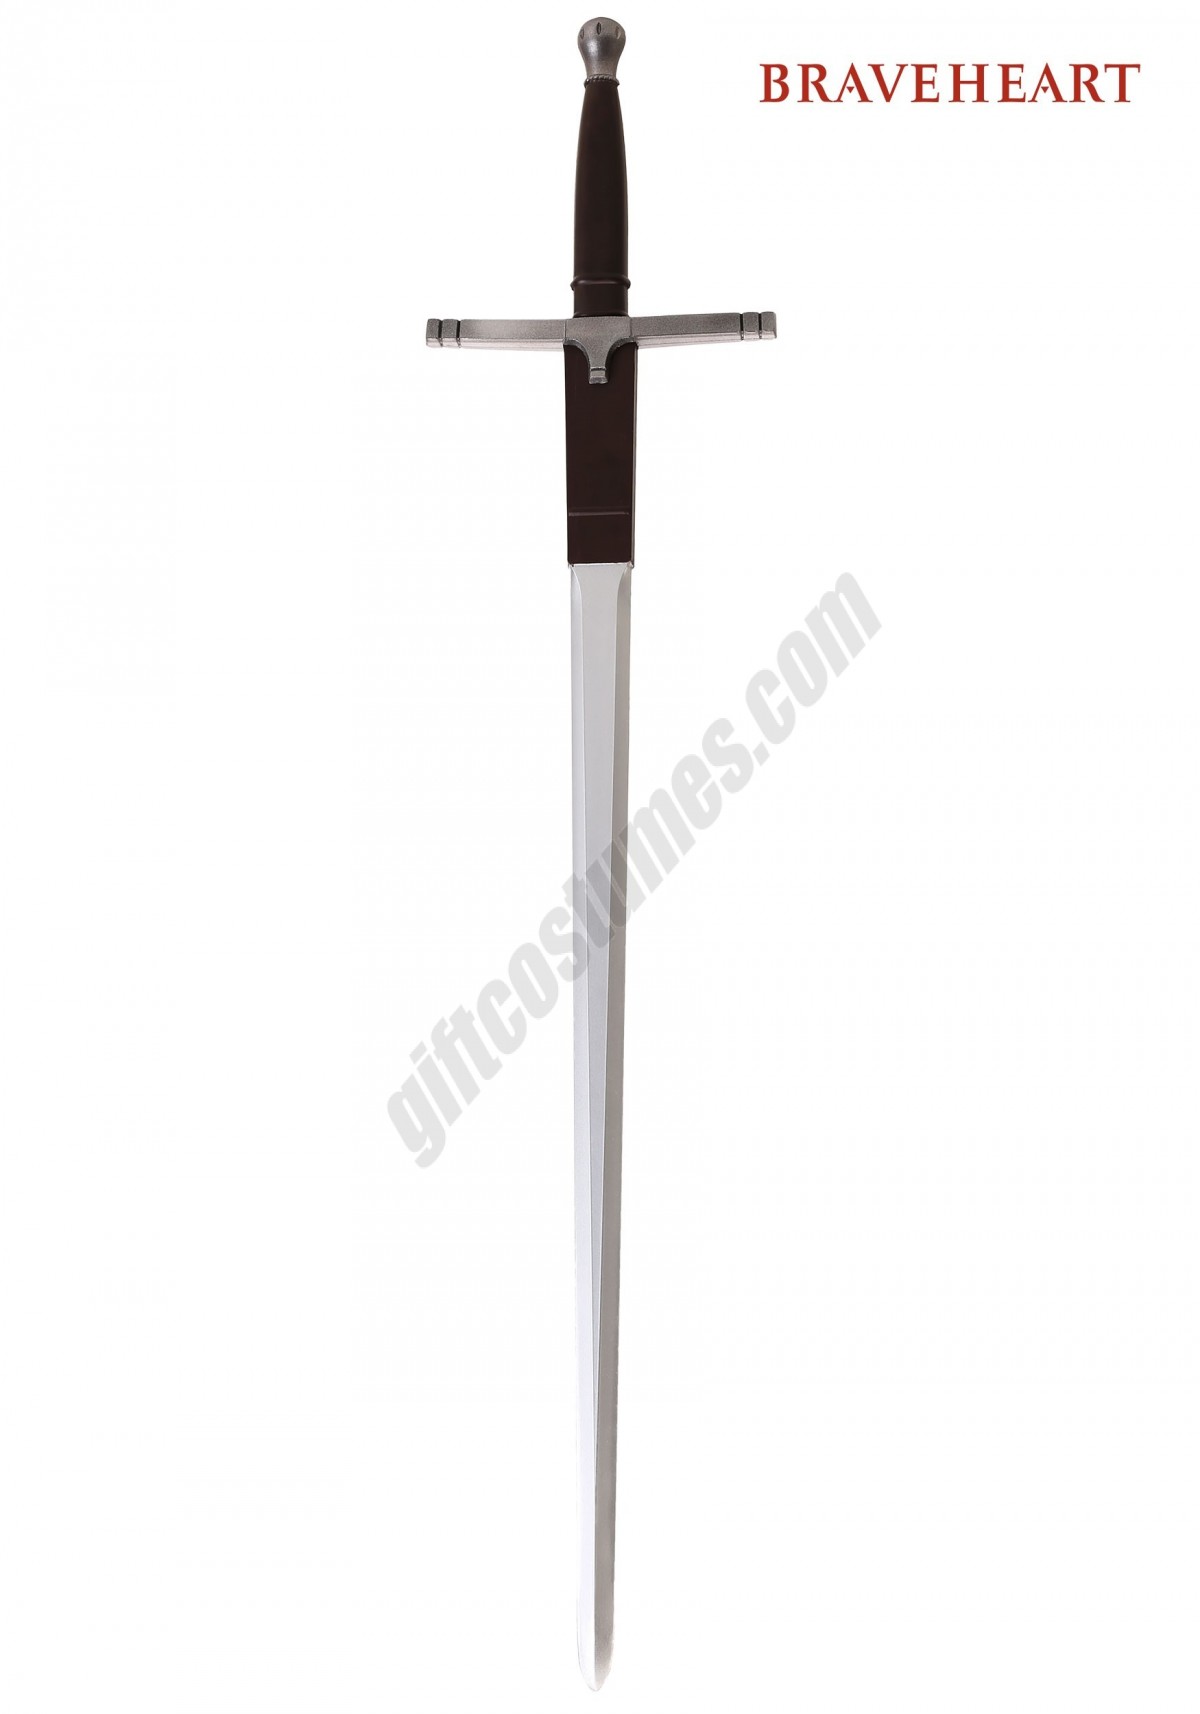 William Wallace Sword from Braveheart Promotions - -0